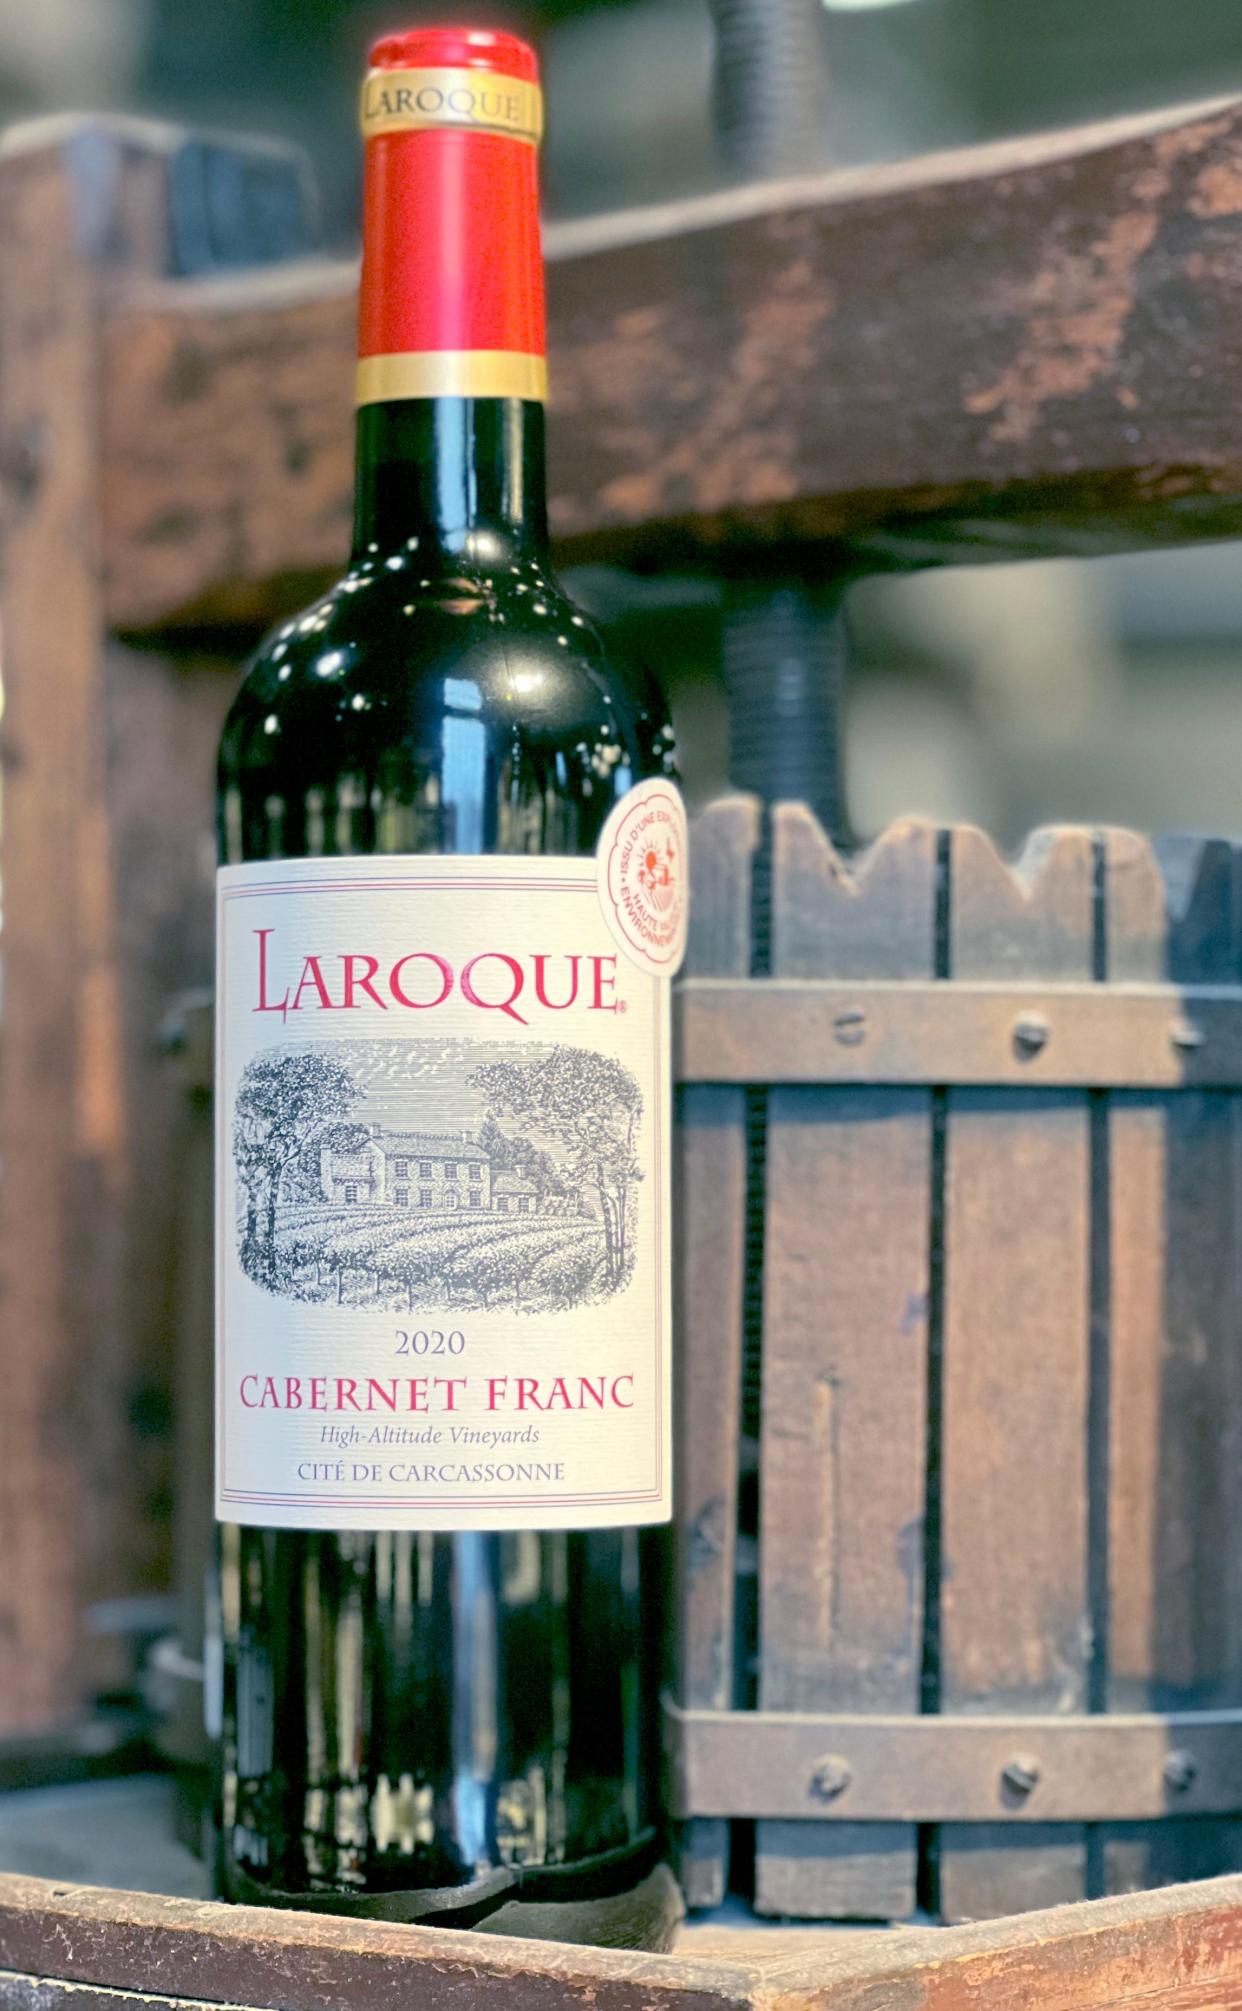 Laroque cabernet franc from France is another fantastic value wine priced at $11.99.